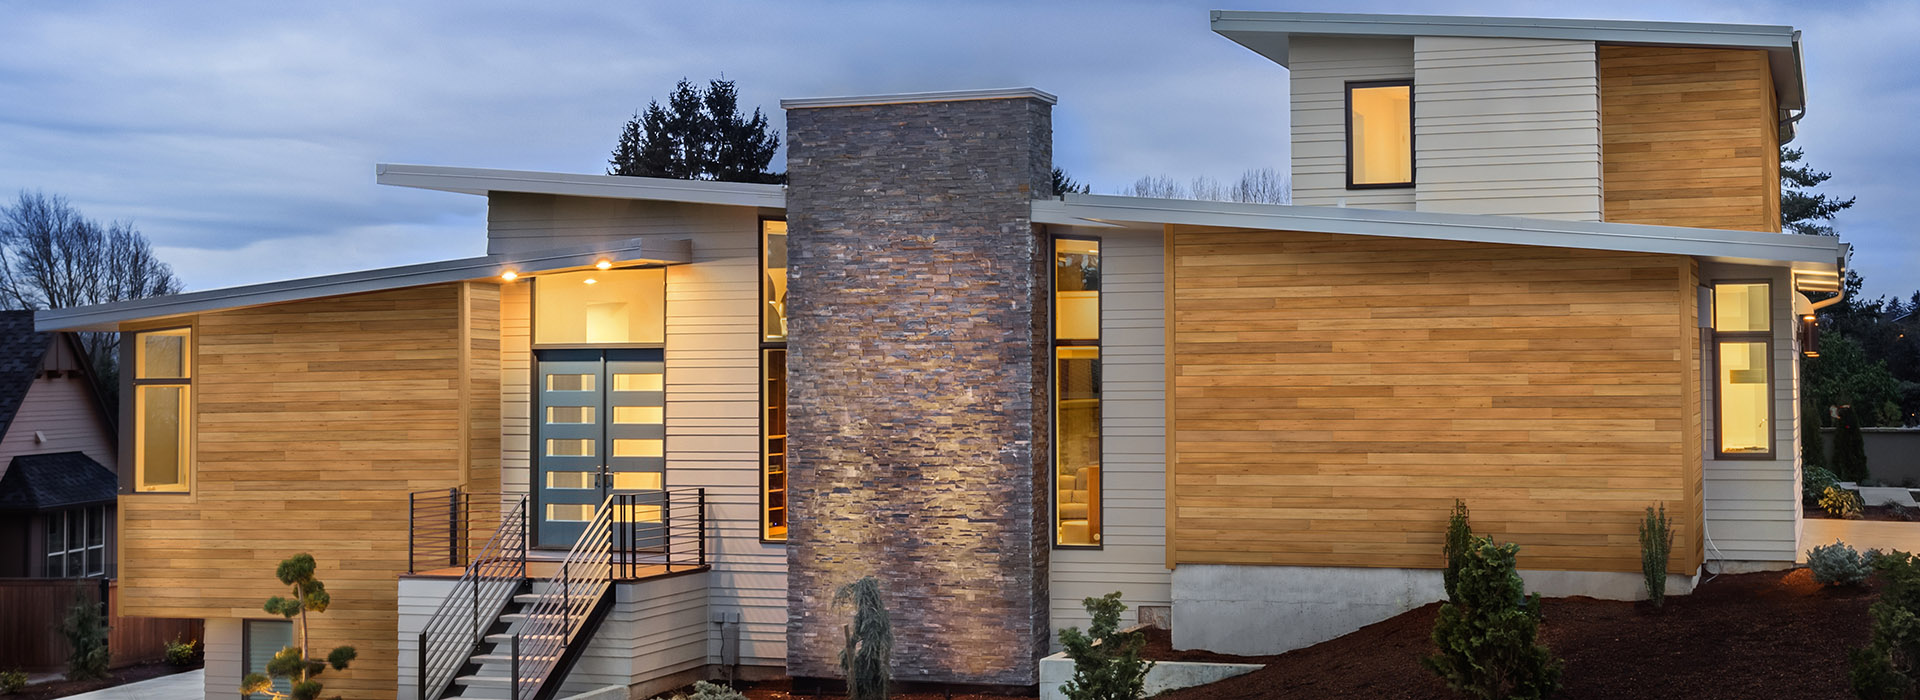 Flat roof modern architecture home with UFP-Edge Thermally Modified VG Hemlock wood siding dusk